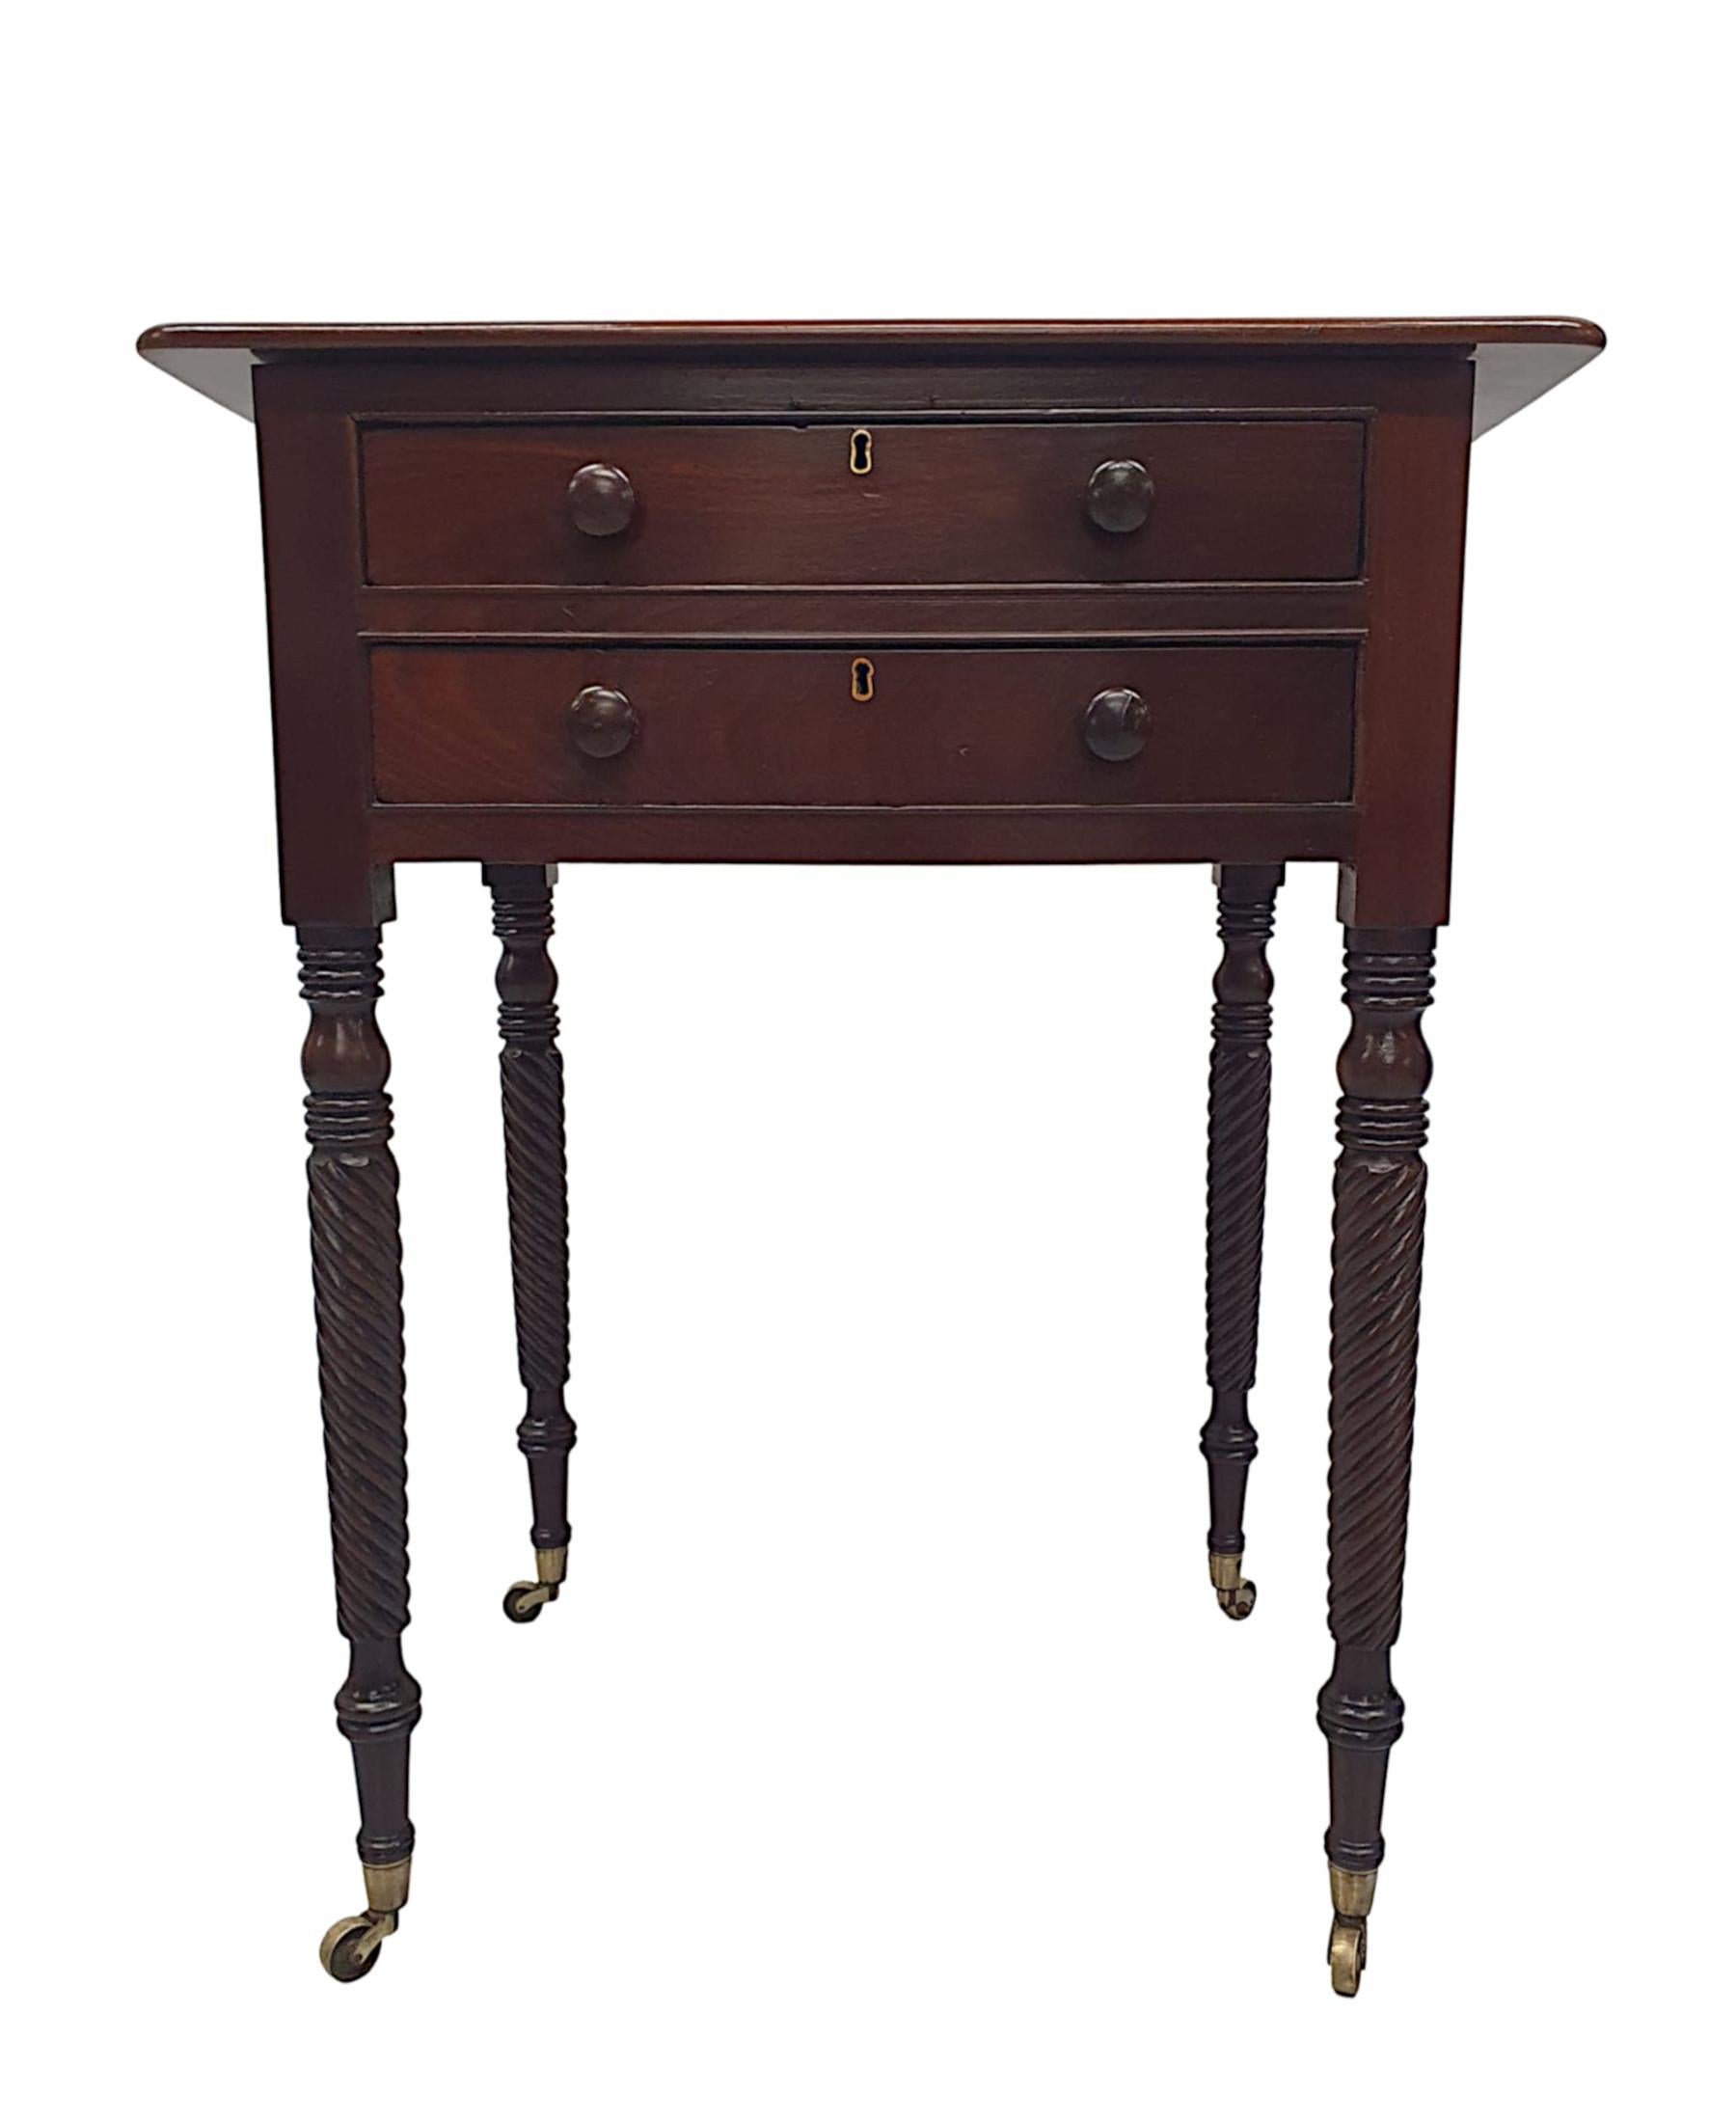 A very fine early 19th Century Irish Regency mahogany occasional table, of fabulous quality and beautifully hand carved with rich patination and grain. The brass hinged, moulded top of rectangular form lifts upwards to reveal a storage compartment,